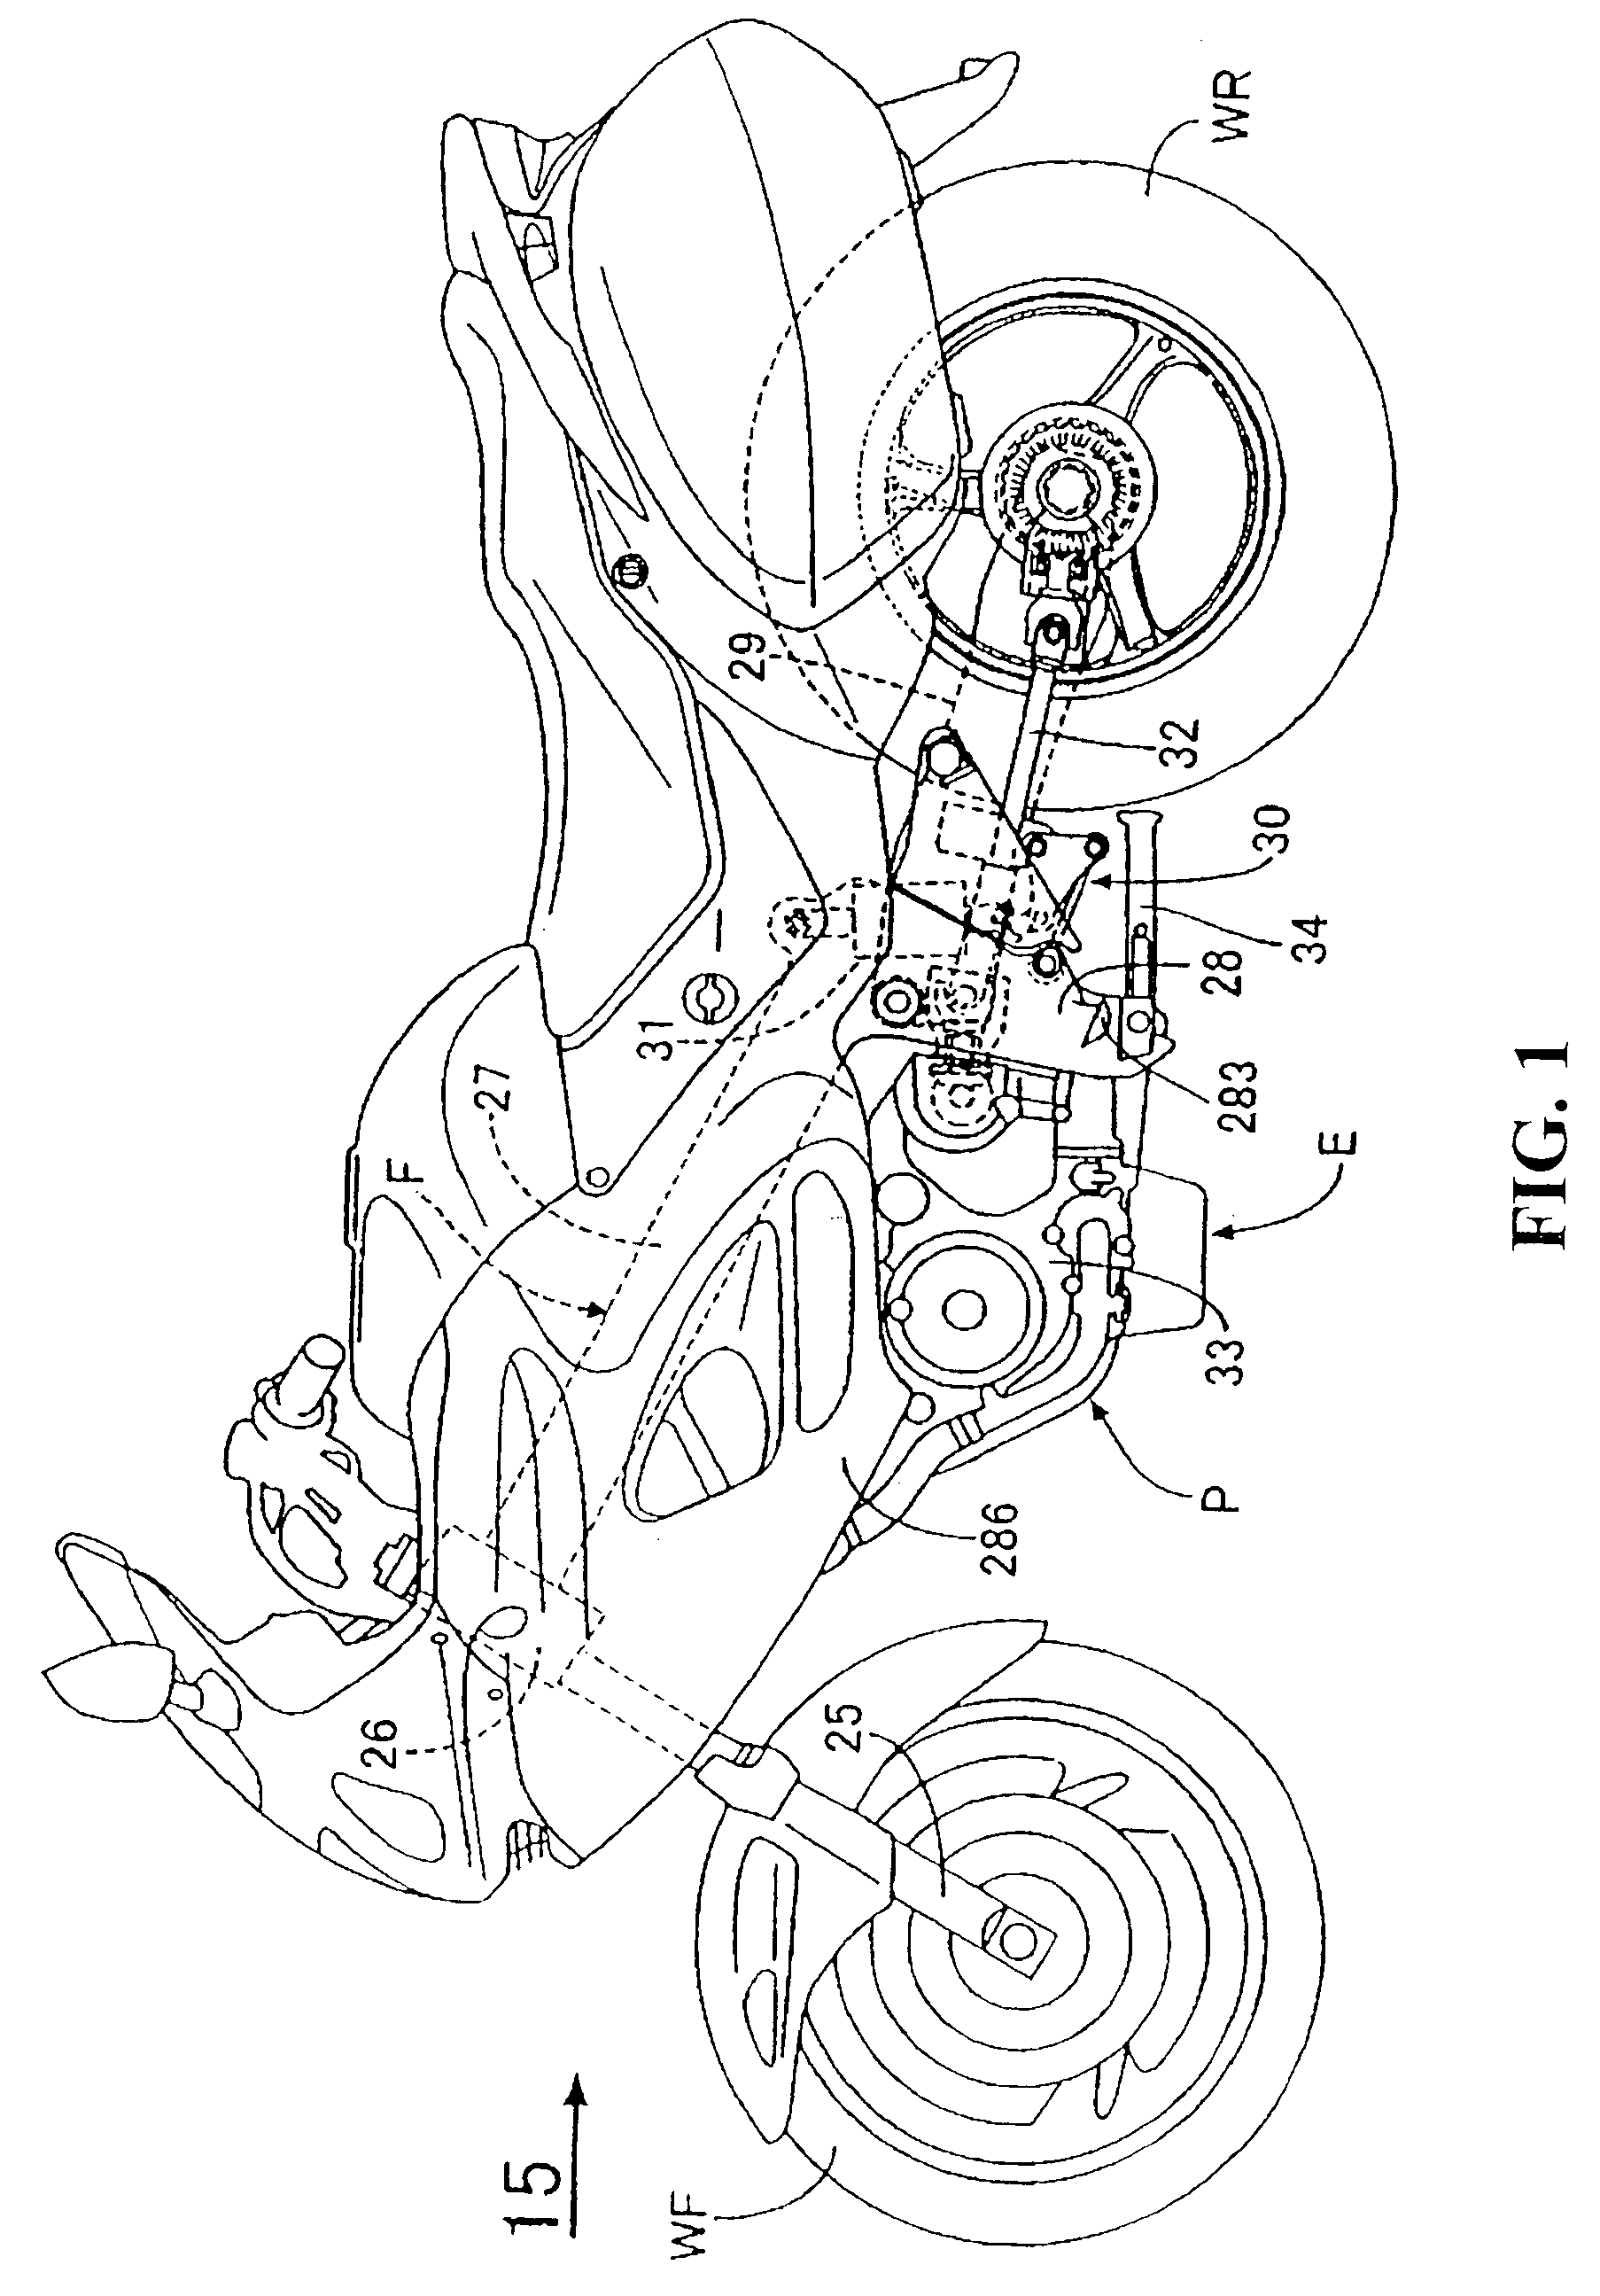 Engine for small vehicle